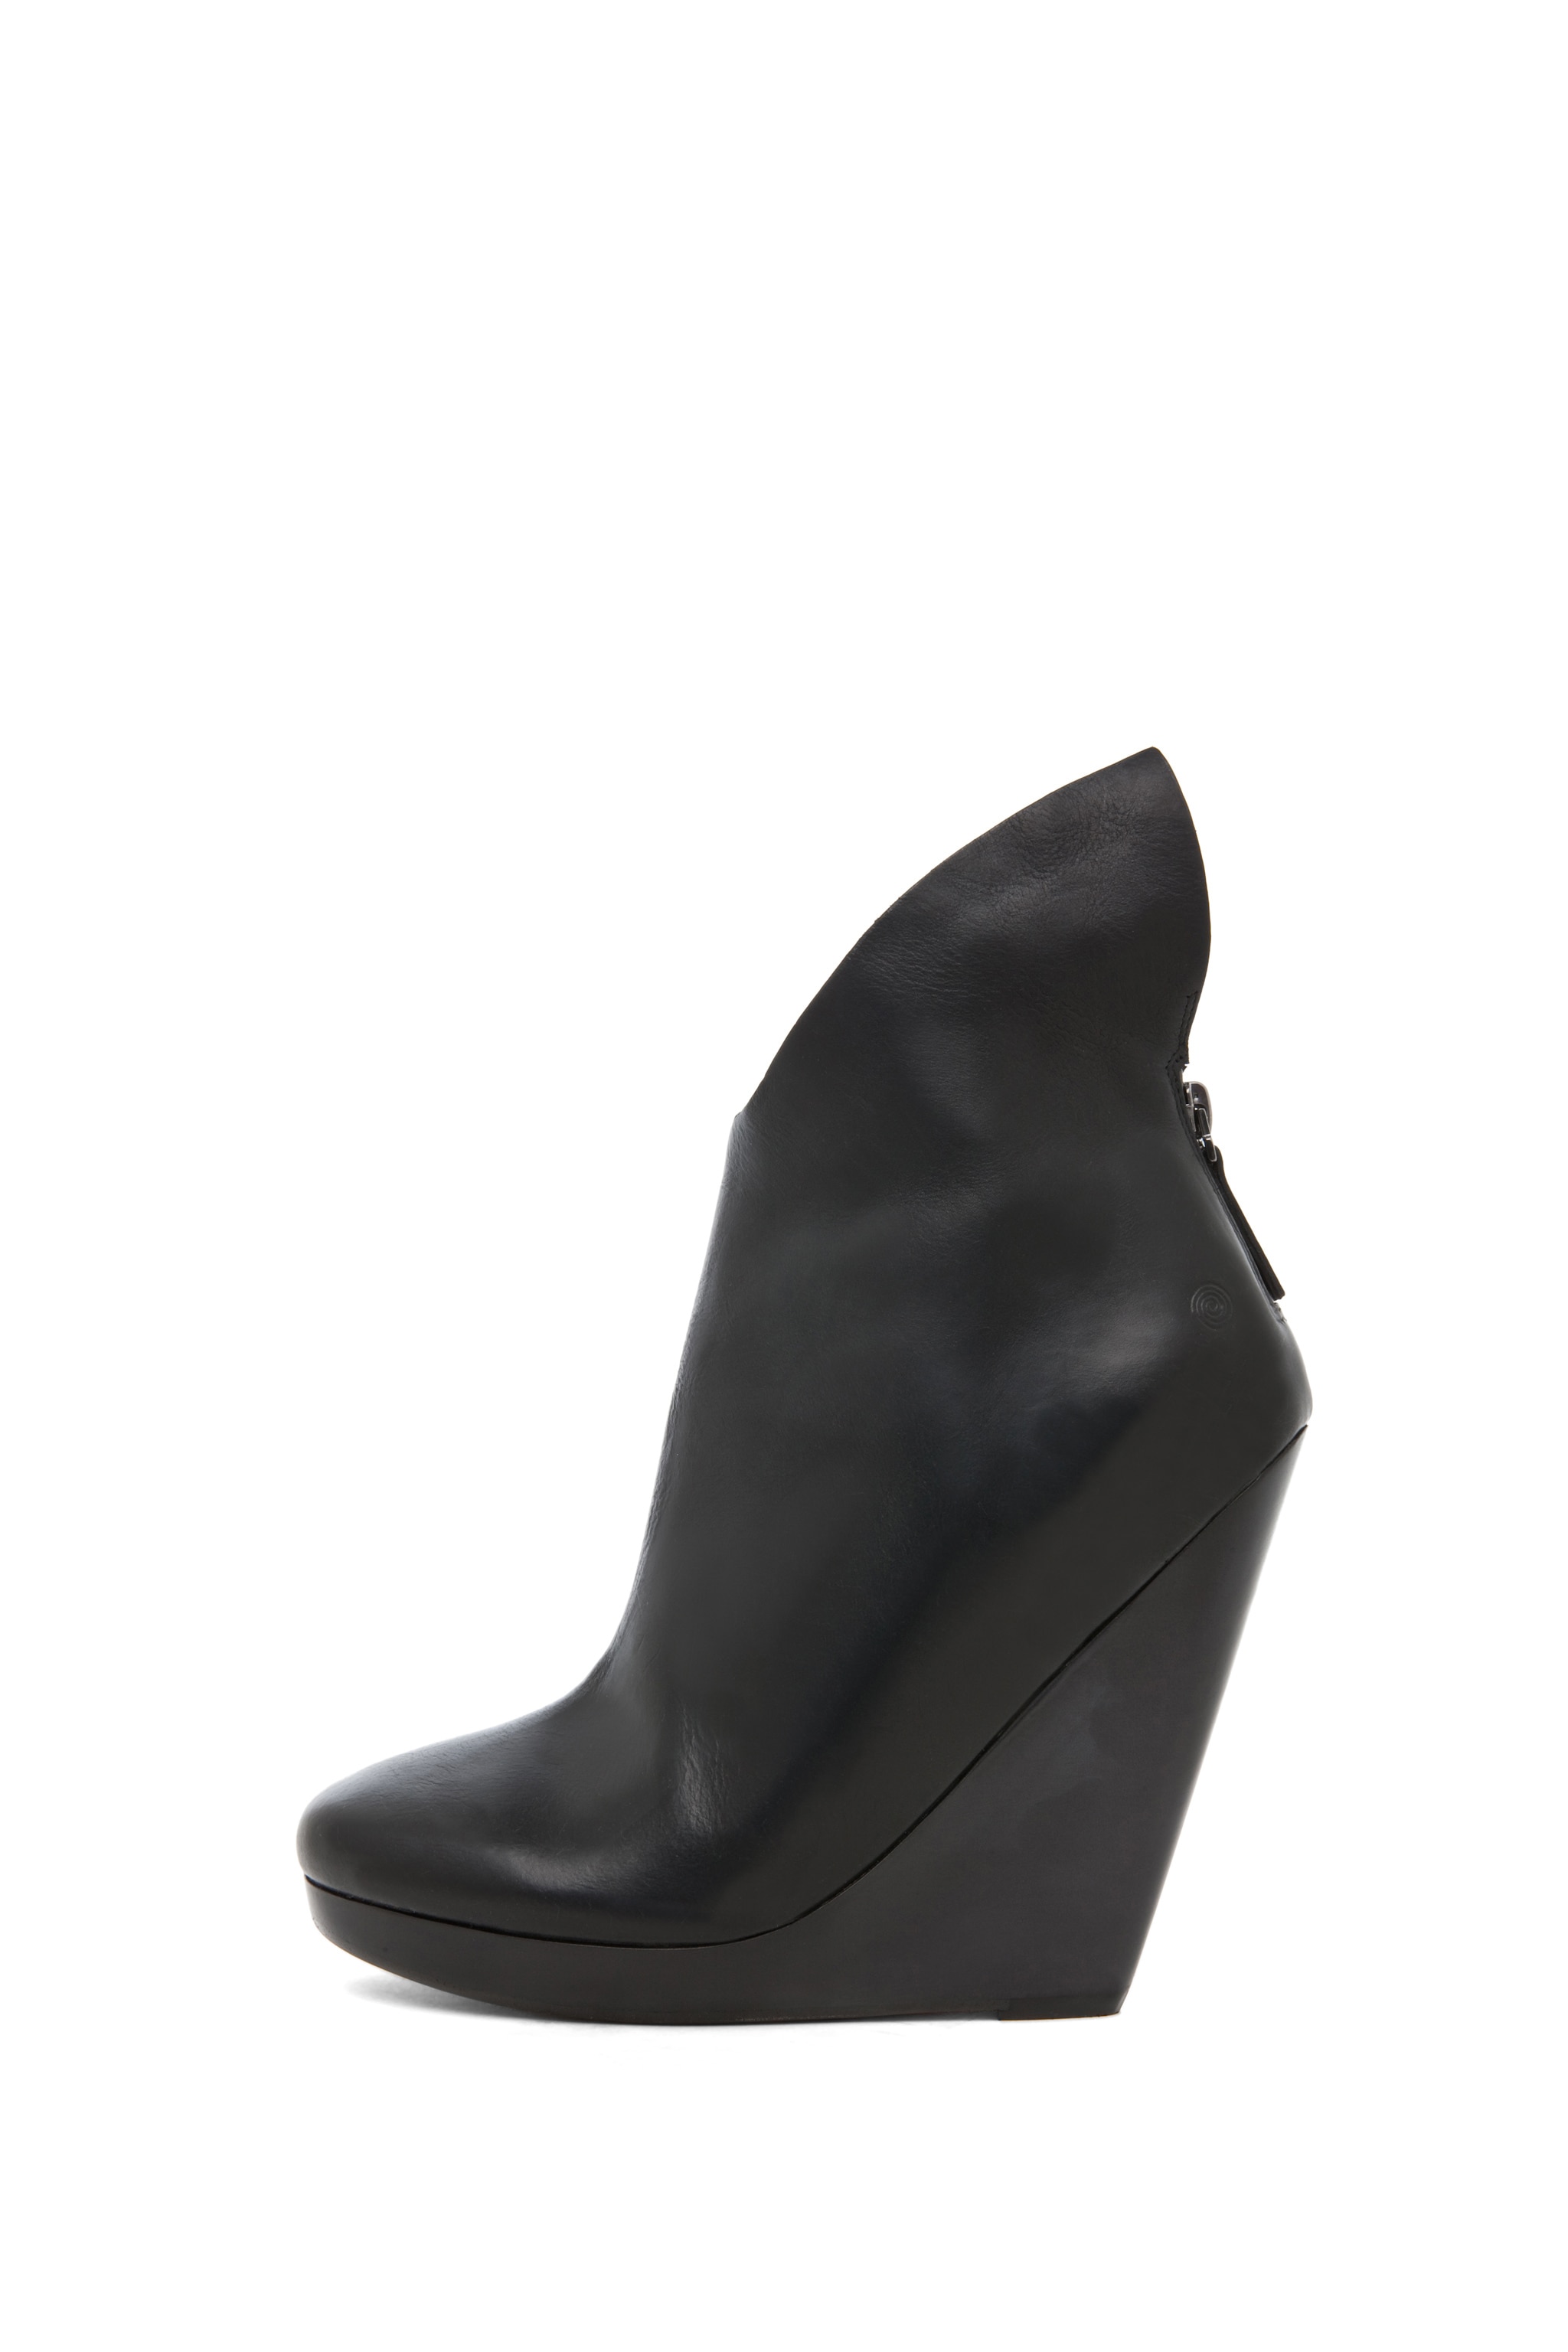 Image 1 of Marsell Zeppola Leather Bootie in Black